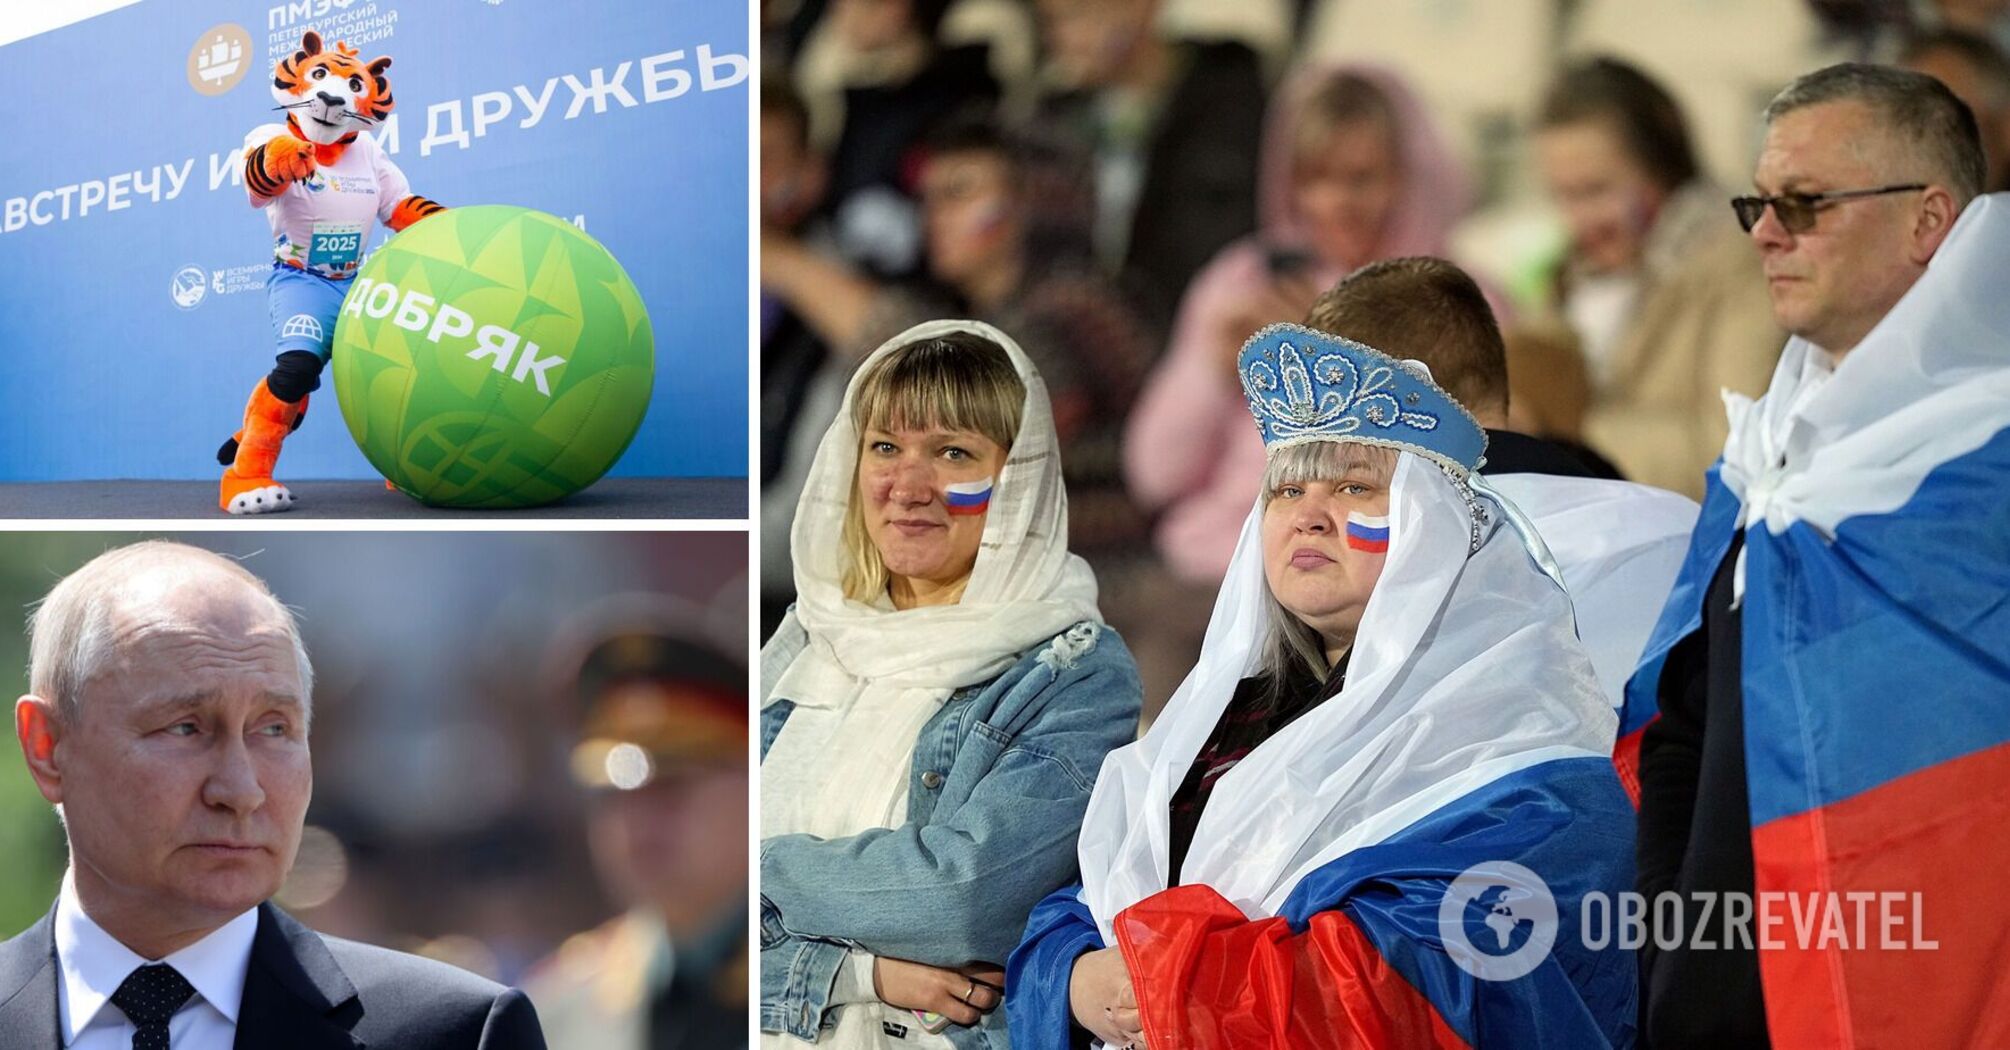 Putin has disgraced himself with the 'alternative Olympics' that he promised to hold in Russia